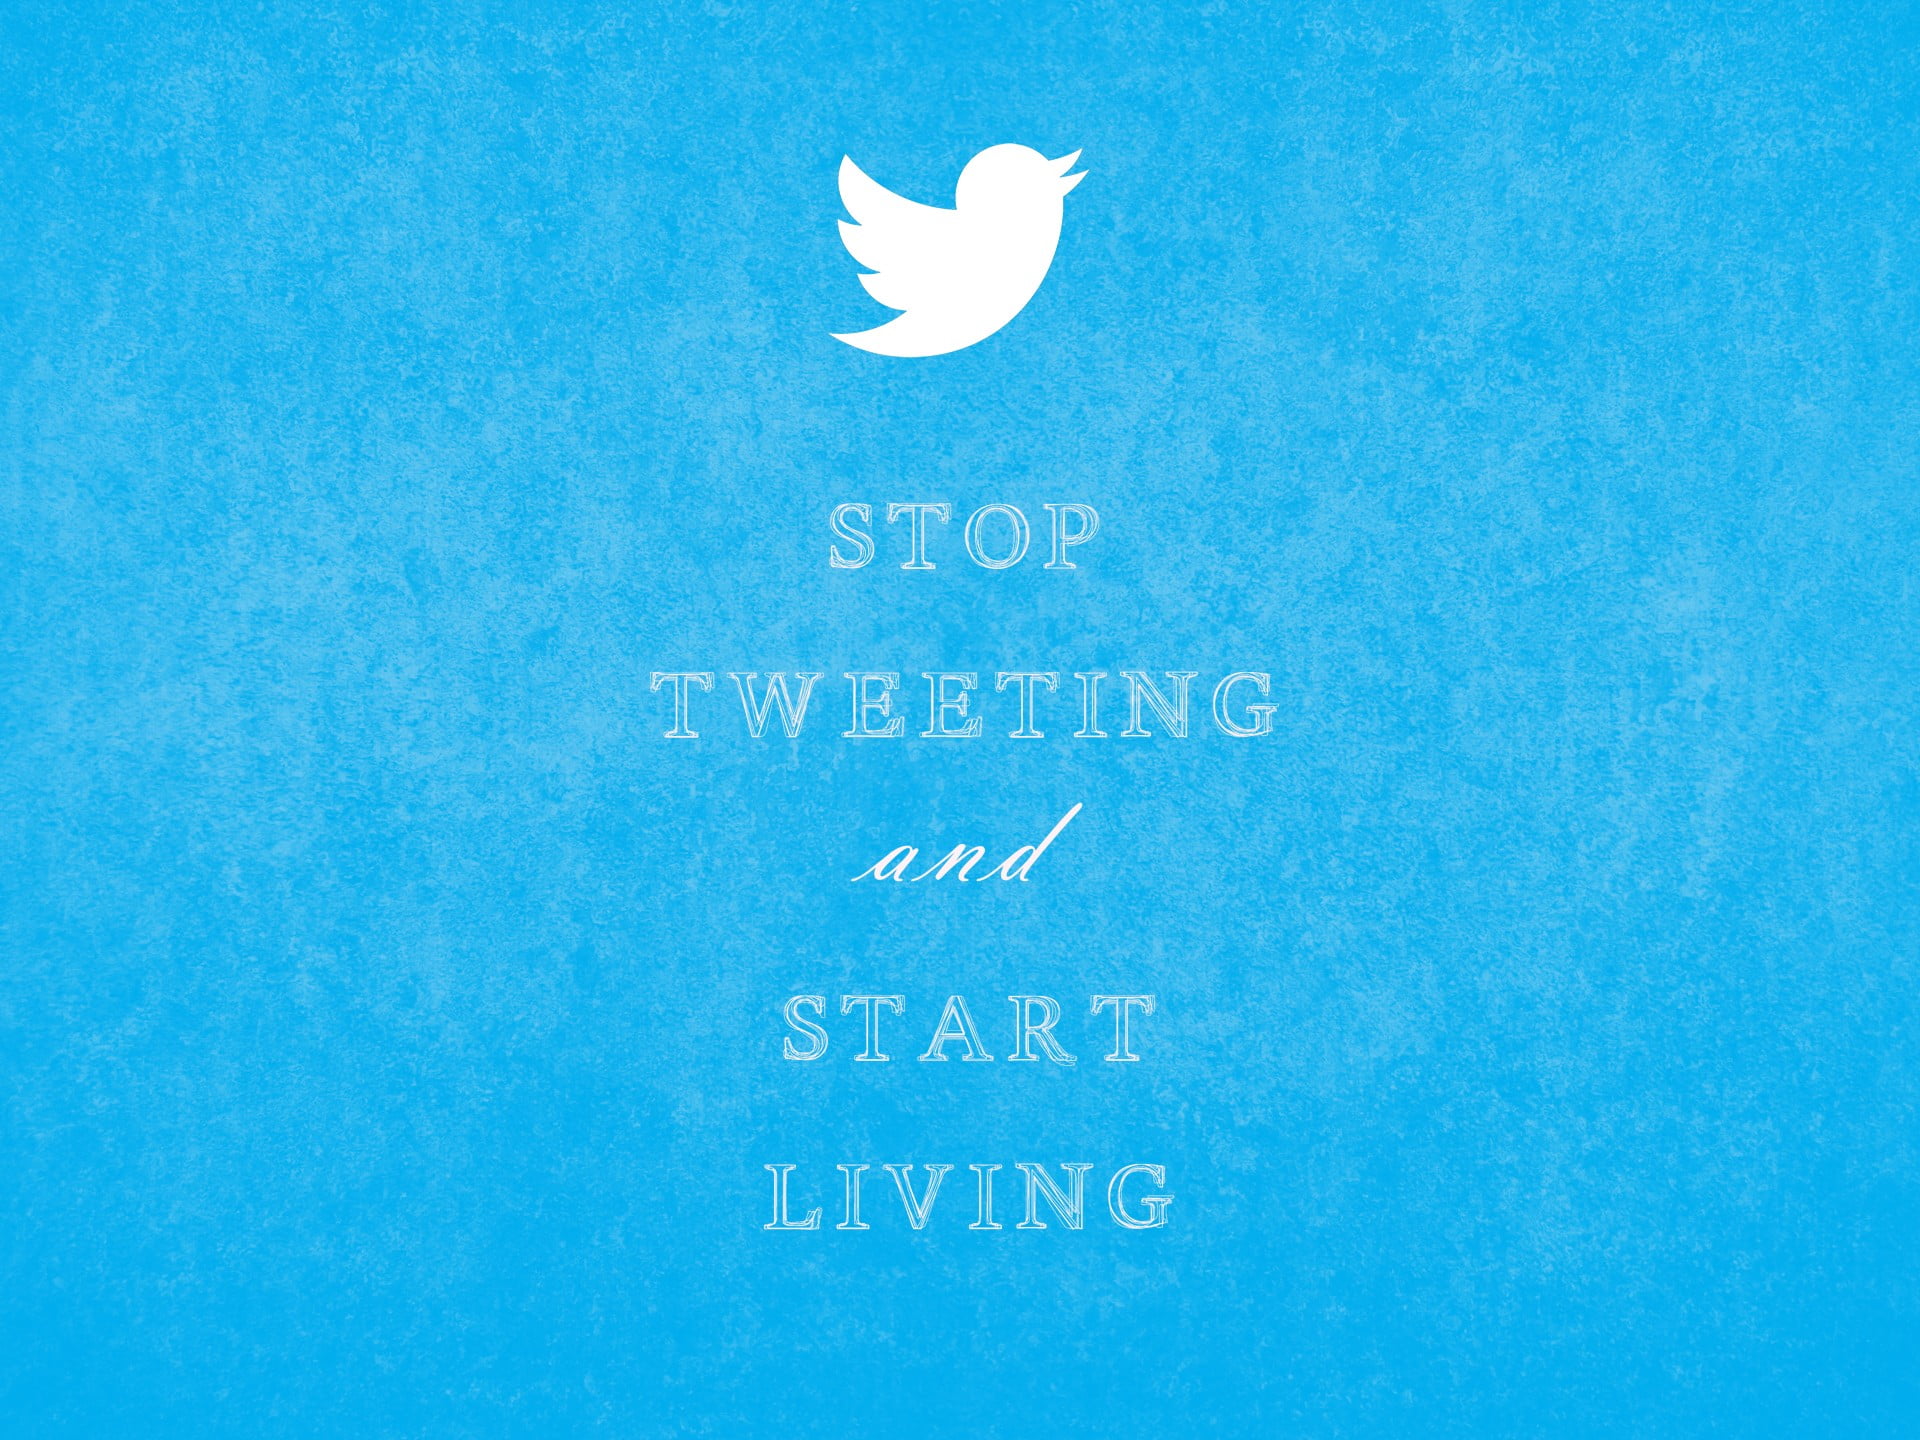 Stop tweeting and start text with blue background